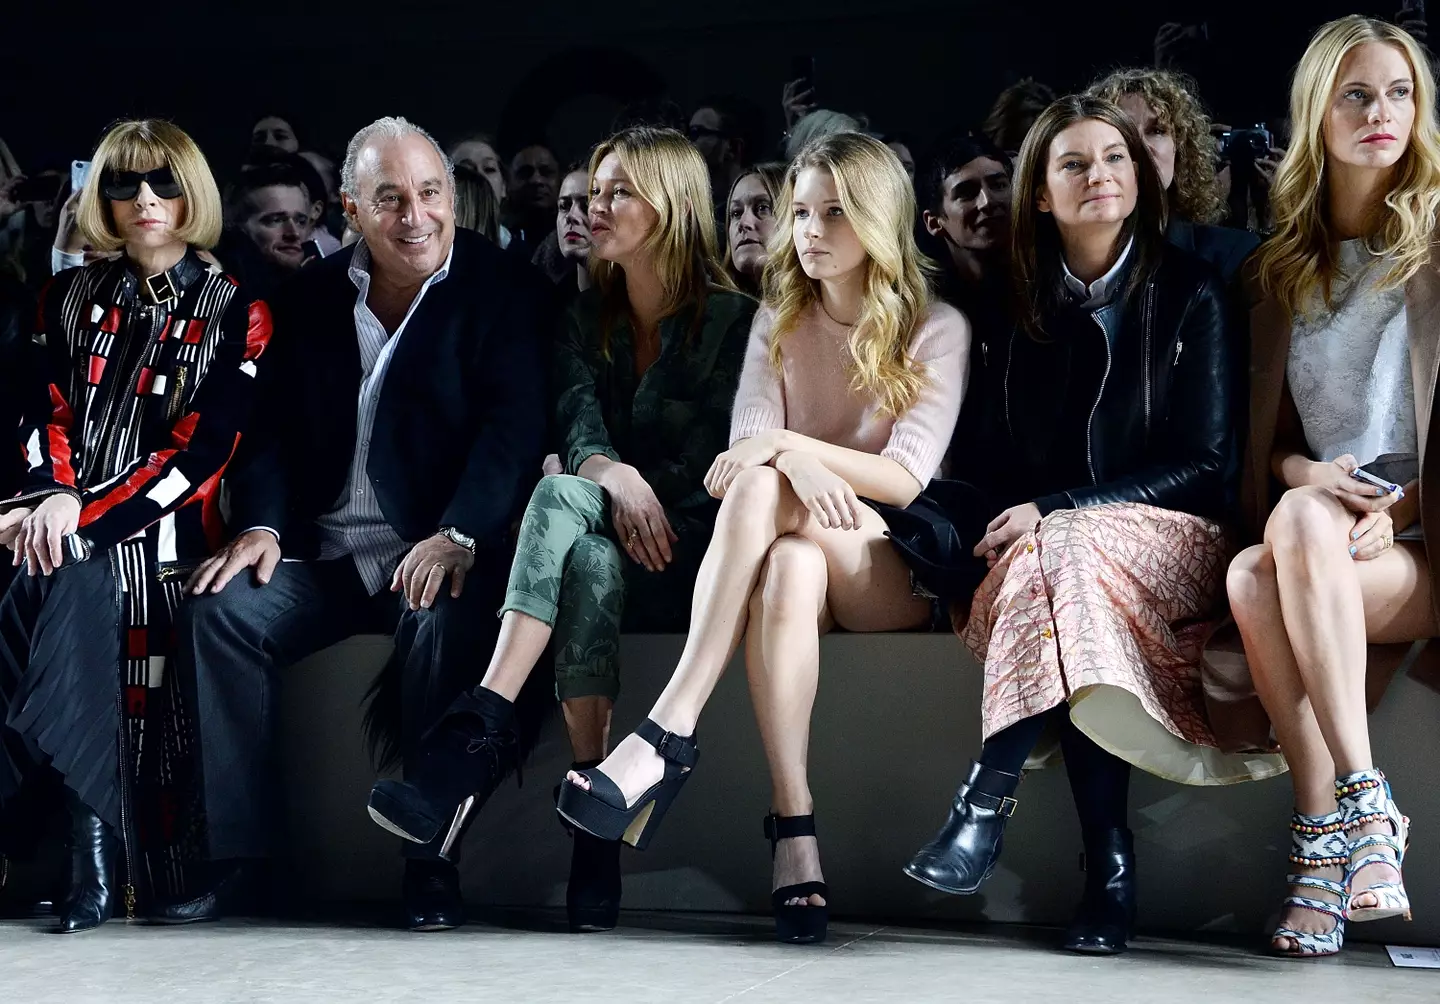 Kate and Lottie pictured together [middle] at a fashion event.